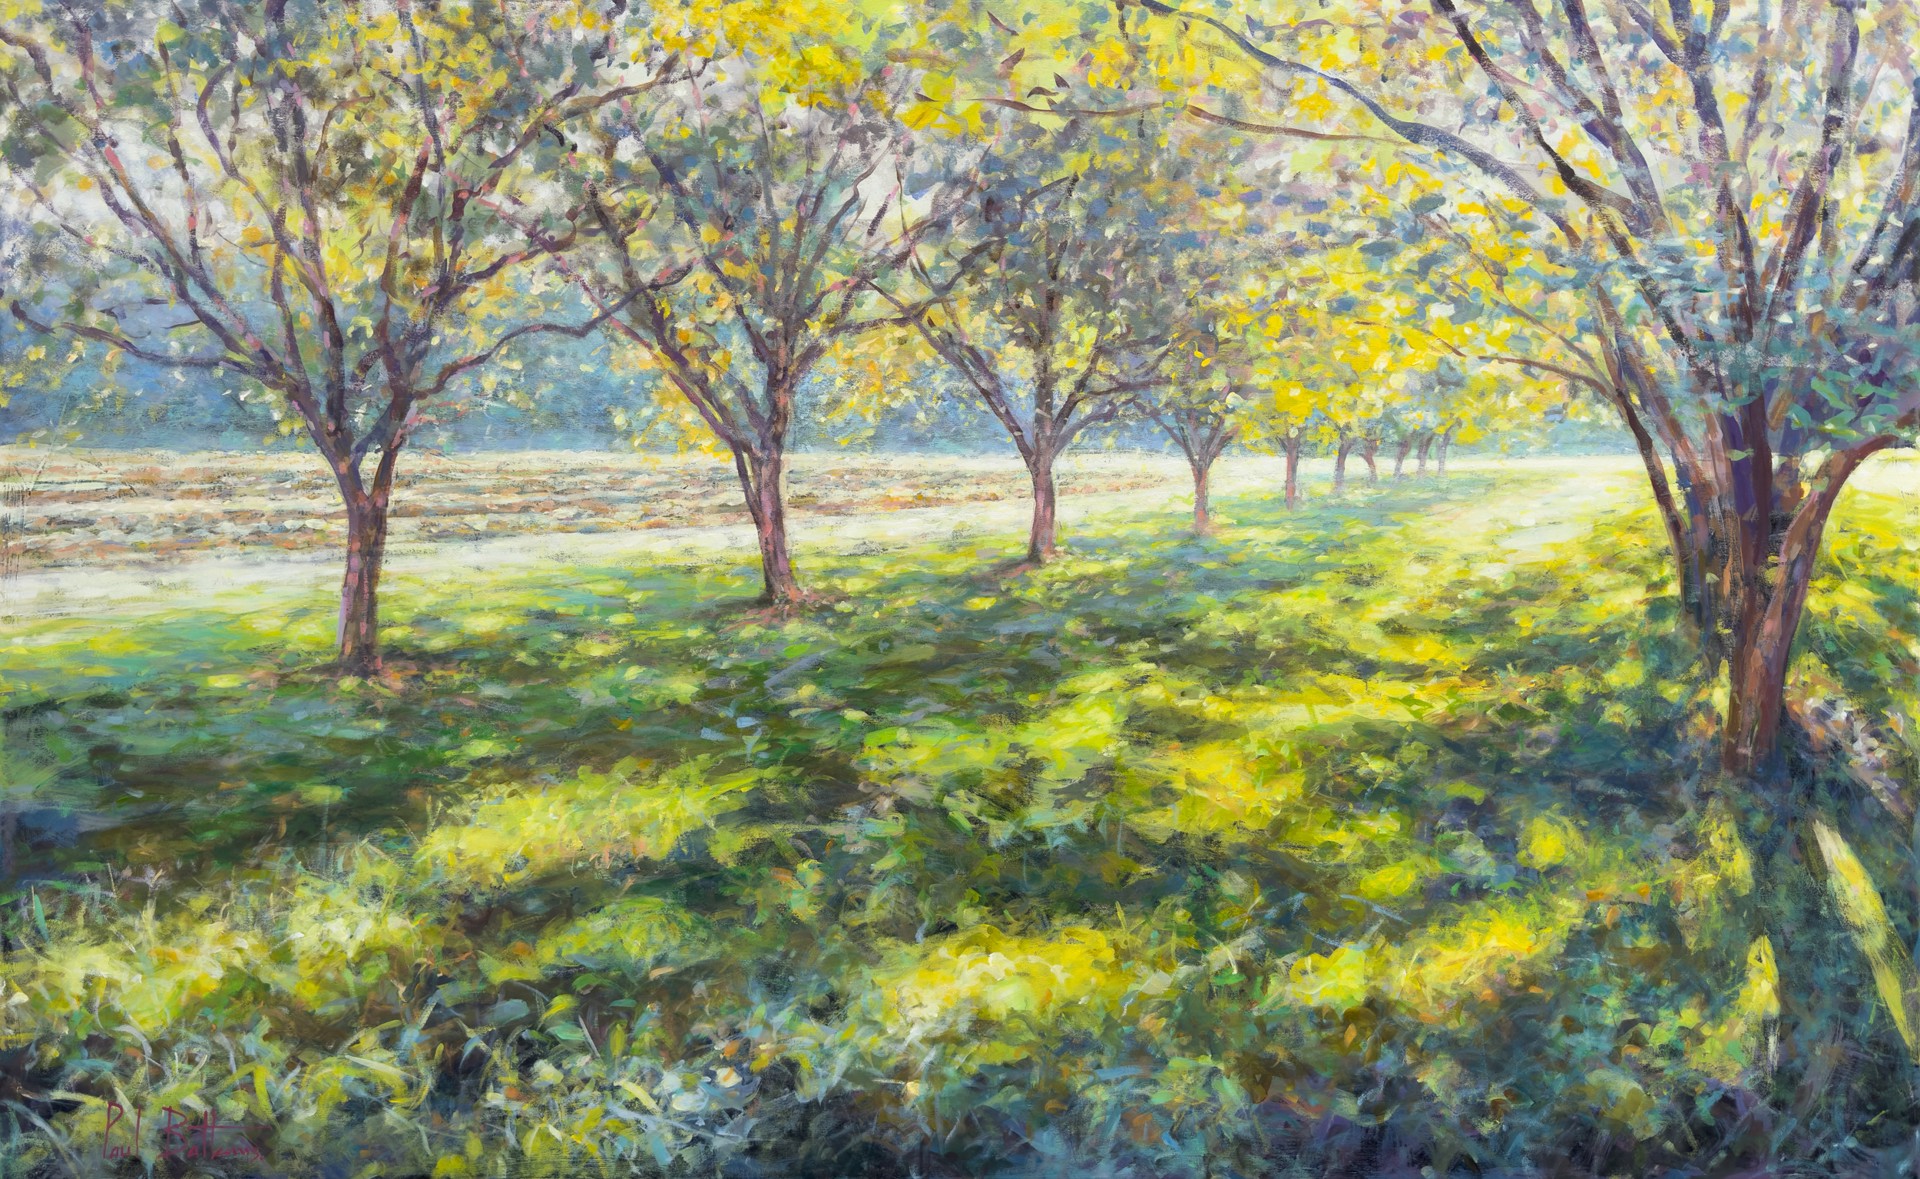 Green painting of a walnut grove with rows of trees